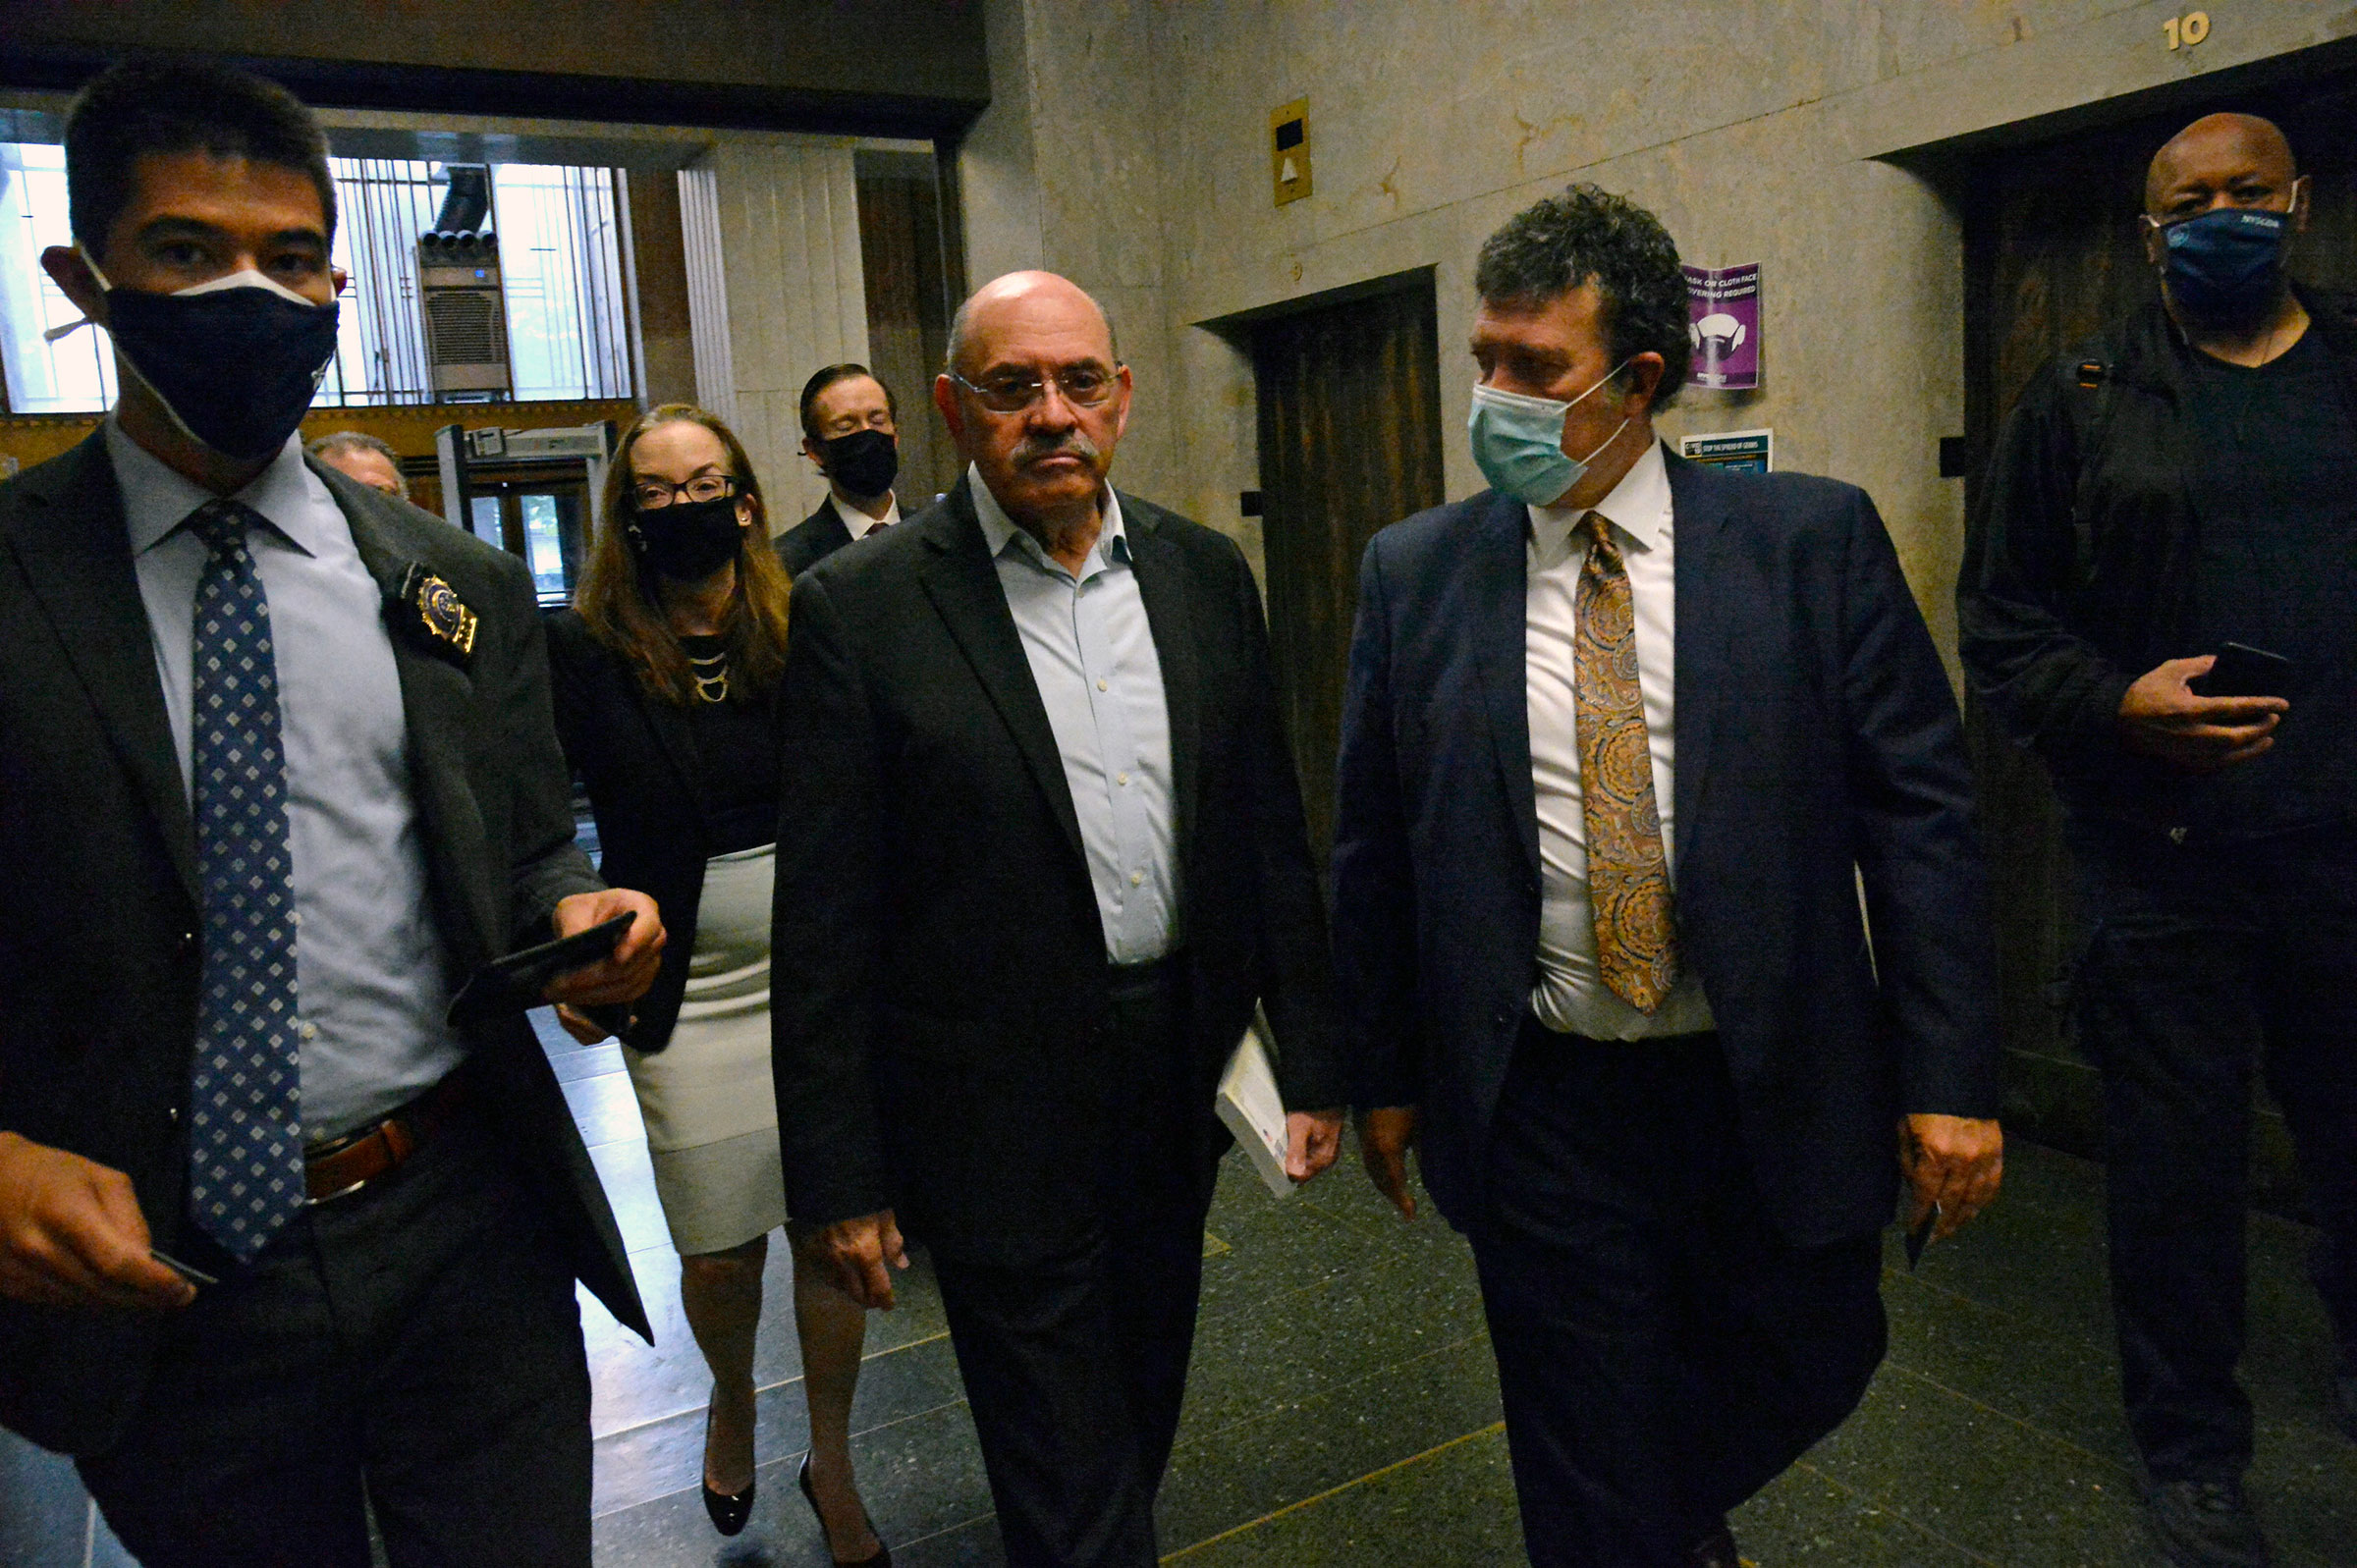 Allen Weisselberg, second from left, Donald Trump's long-serving chief financial officer, surrenders Thursday morning, July 1, 2021, at the lower Manhattan building that houses the criminal courts and the district attorney's office. (Jefferson Siegel/The